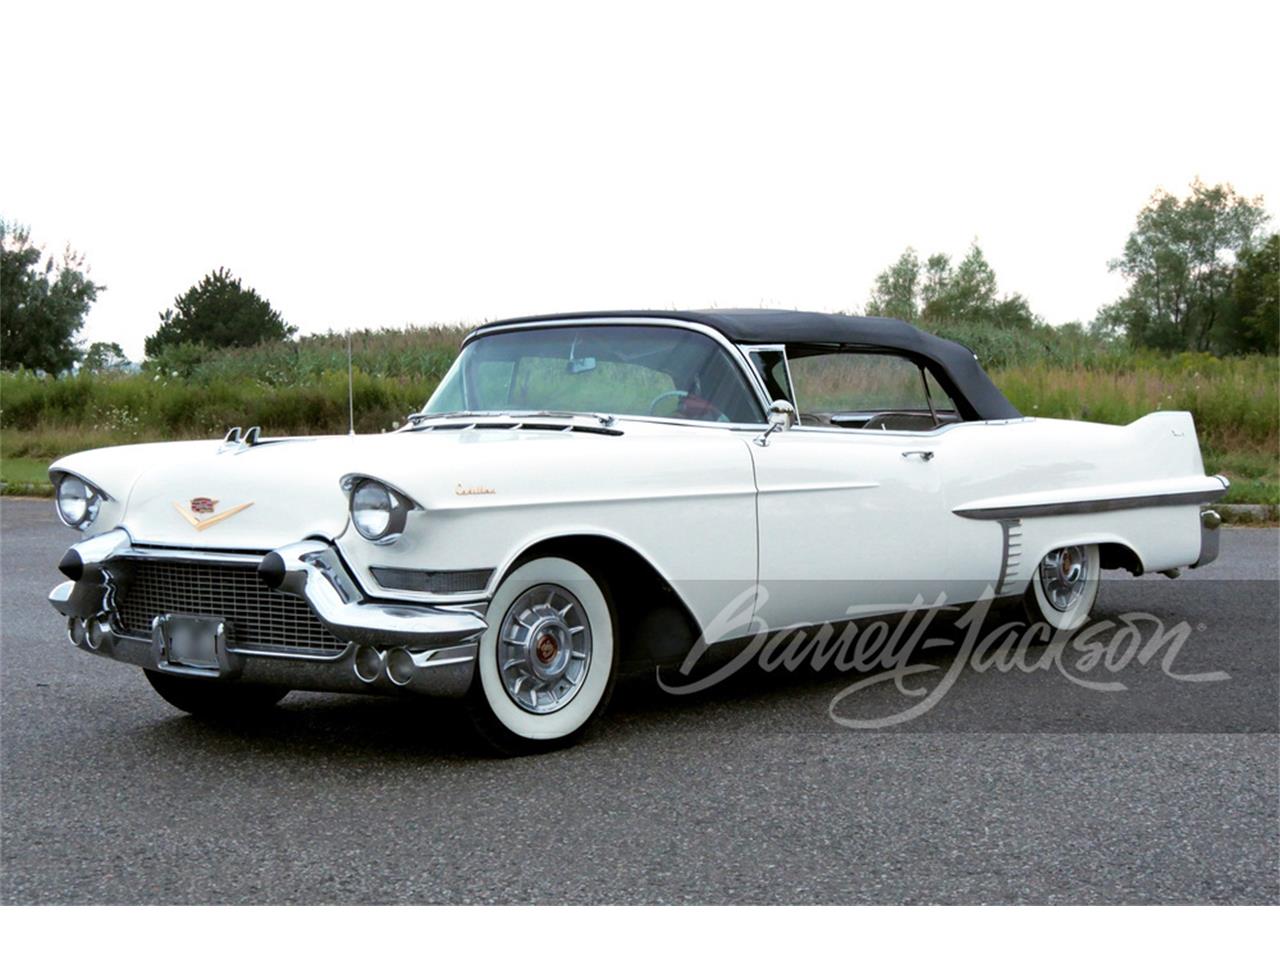 For Sale at Auction: 1957 Cadillac Series 62 in Scottsdale, Arizona for sale in Scottsdale, AZ